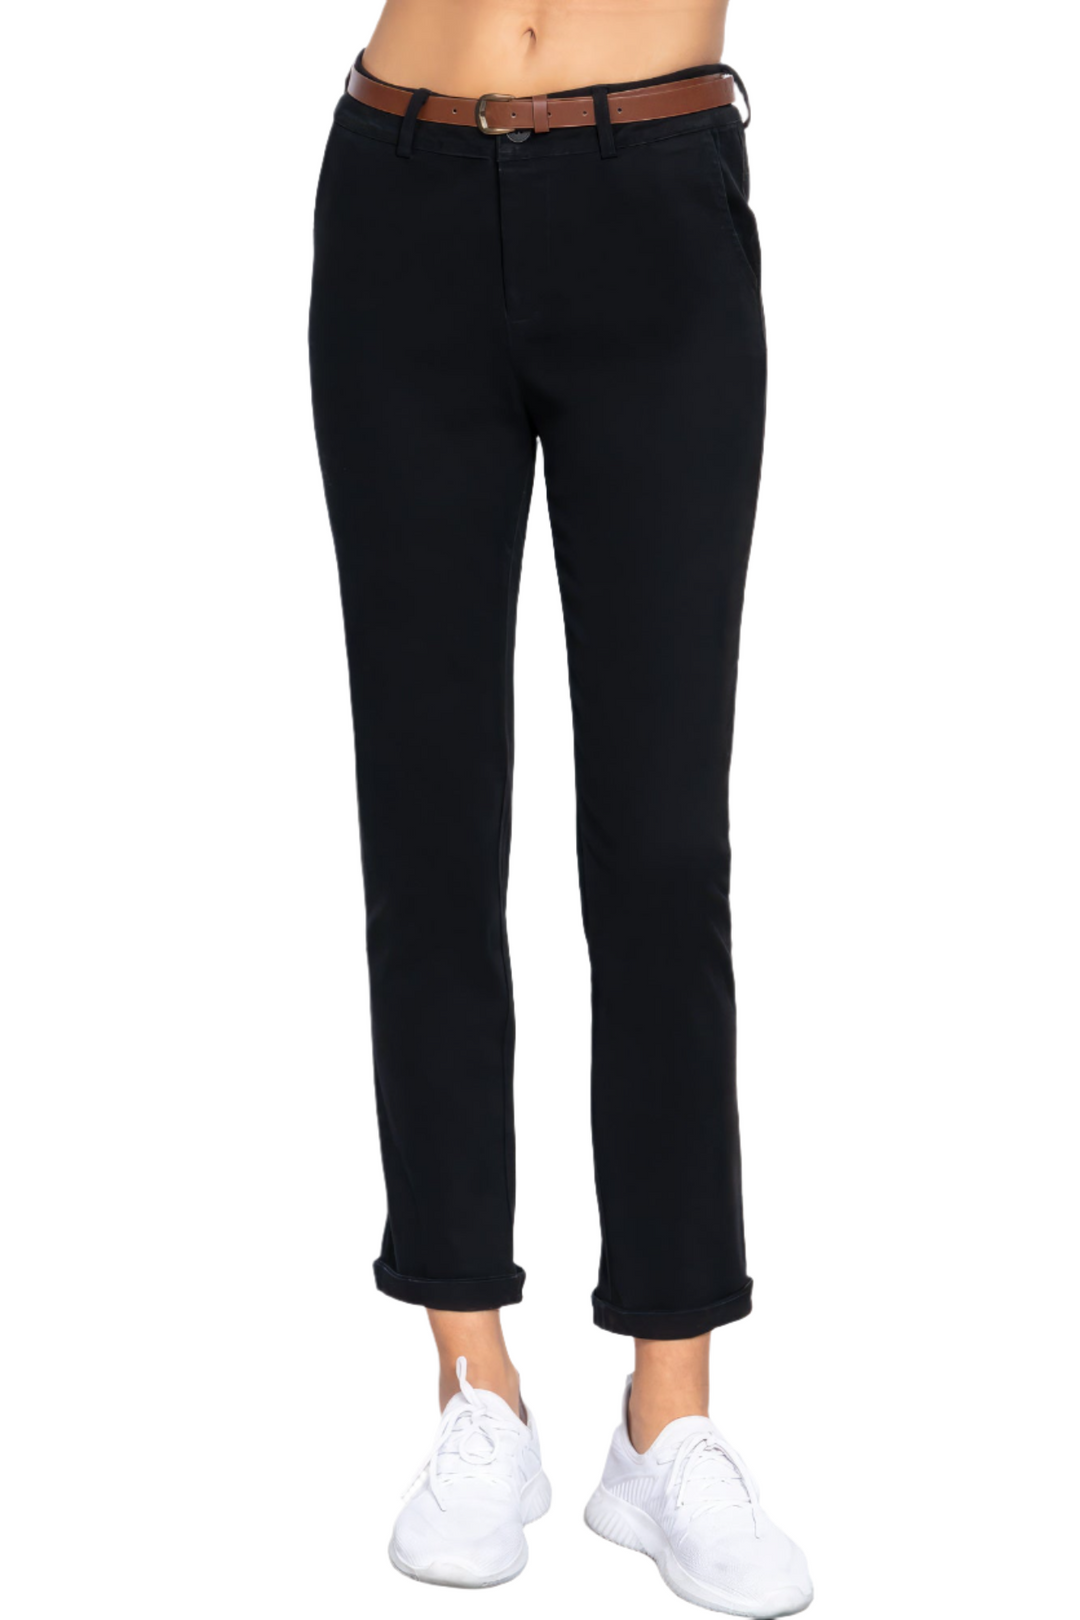 Cotton-Span Twill Belted Long Pants with Tailored Fit & Complementary Belt